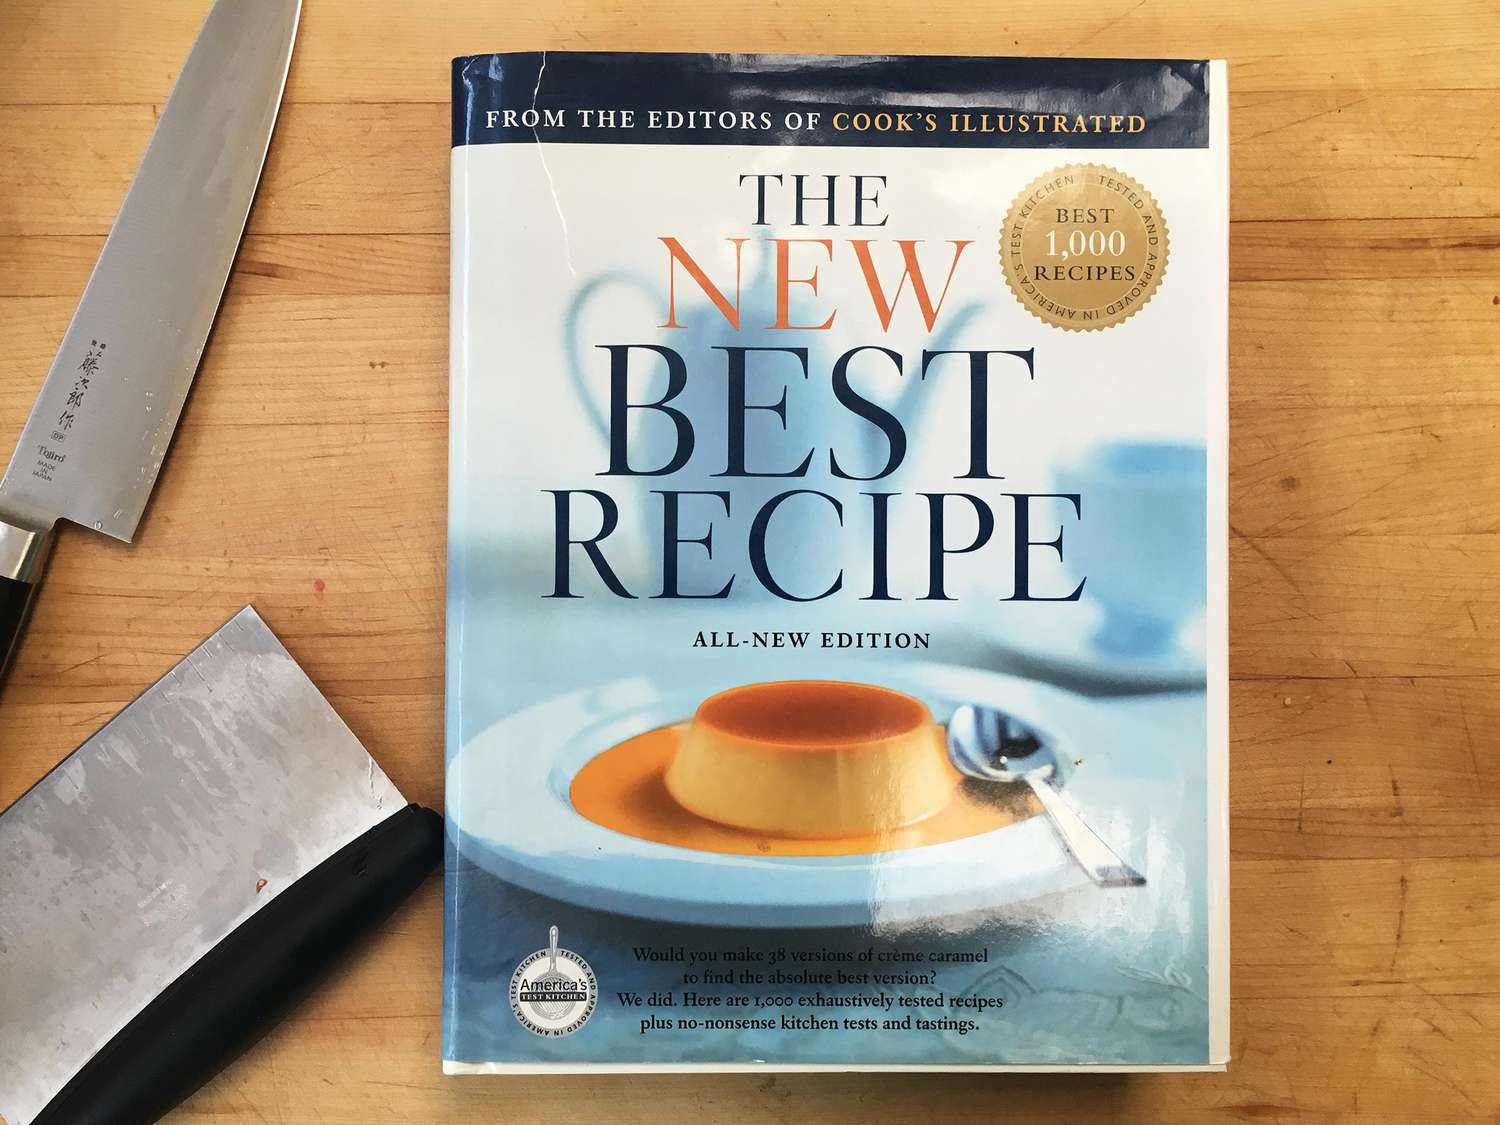 Cook's Illustrated's The Best New Recipe